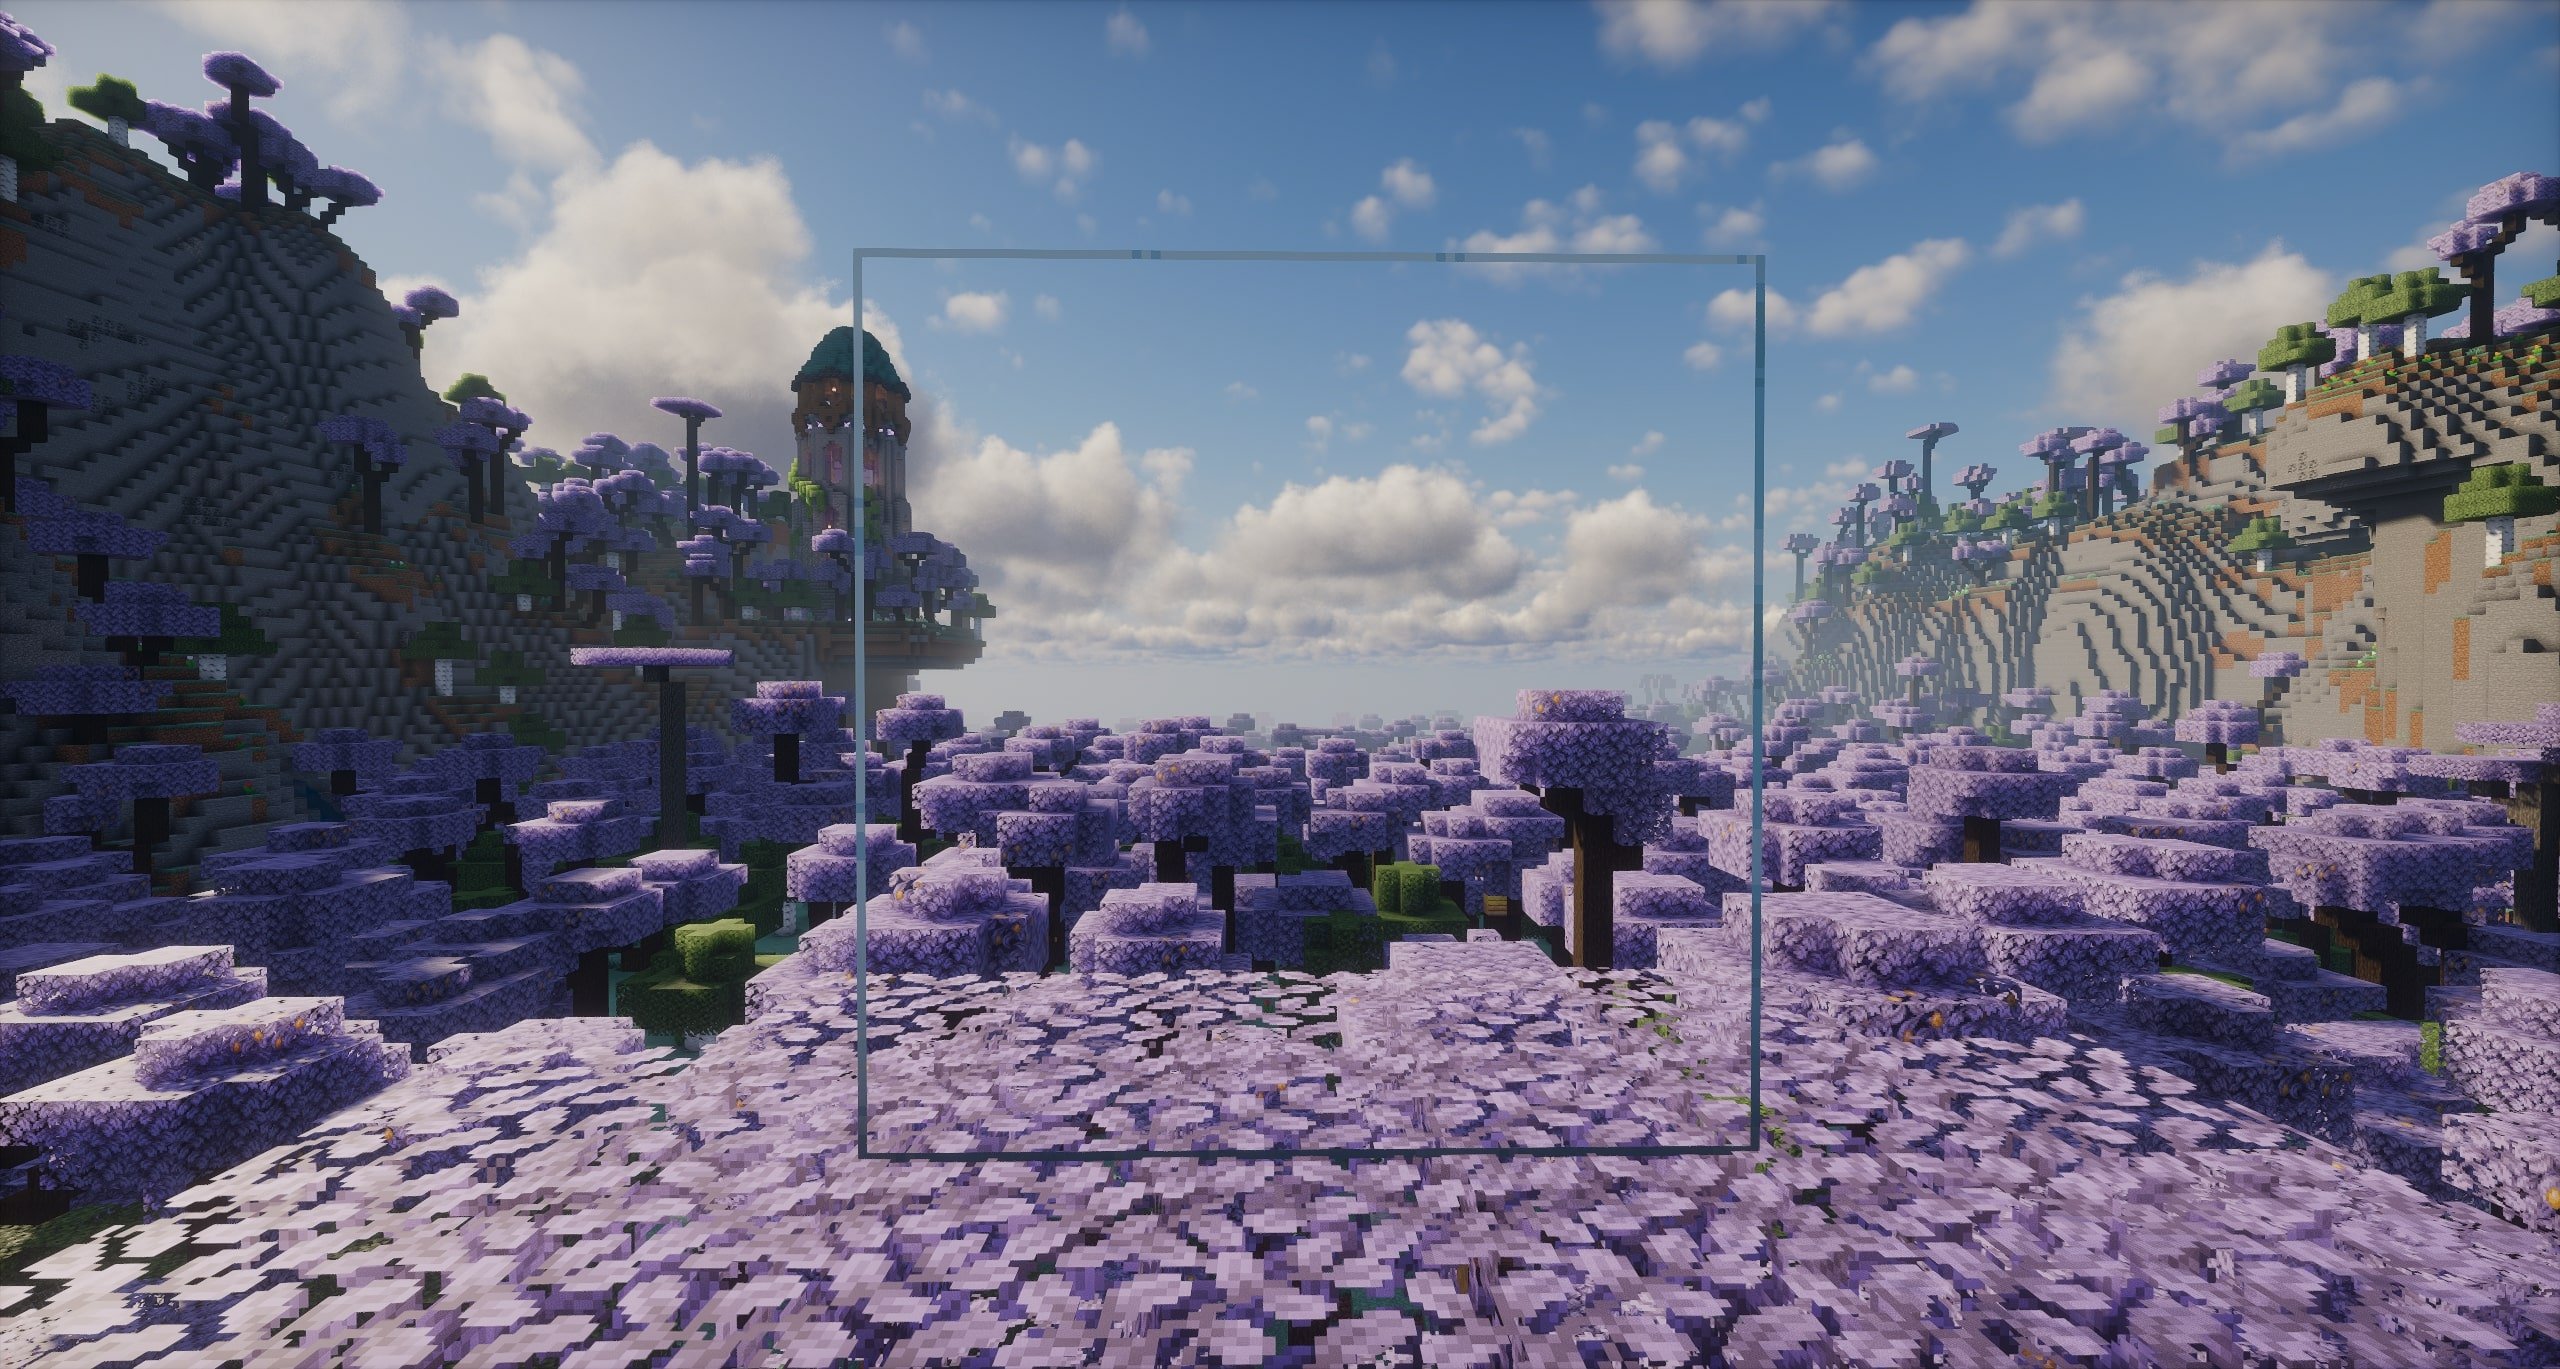 Transparent Glass in a terralith lavender valley